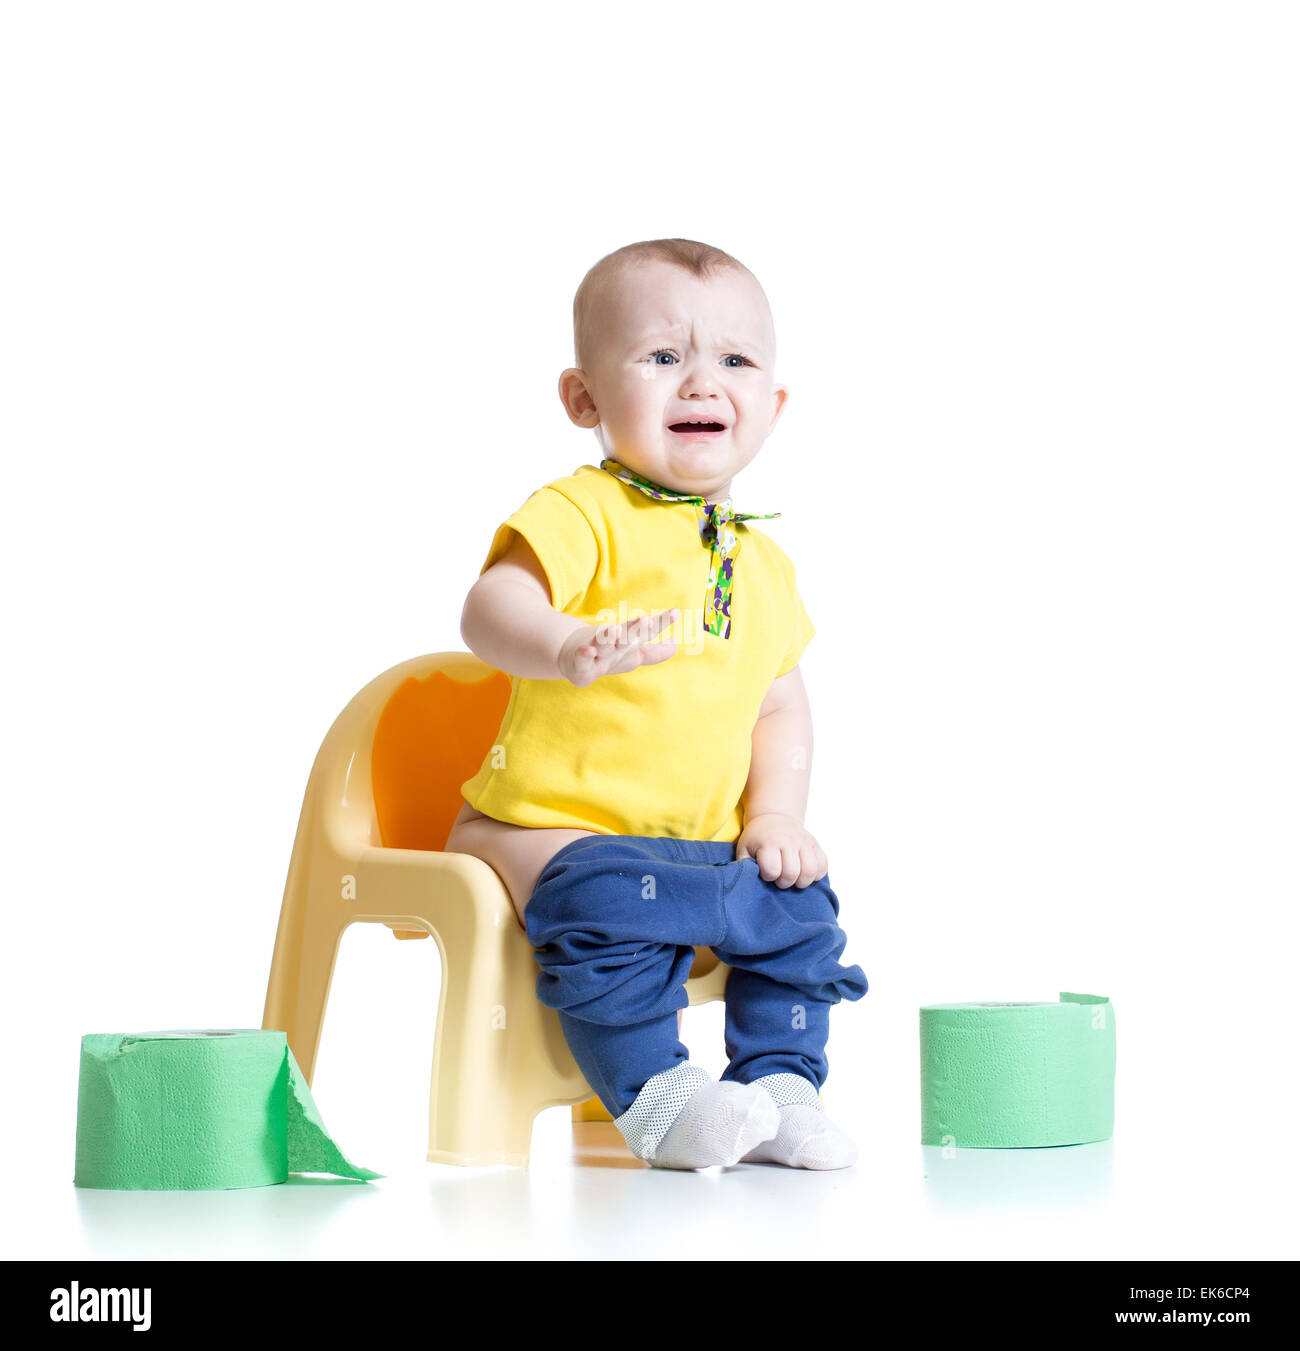 crying child sitting on chamber pot with toilet paper Stock Photo